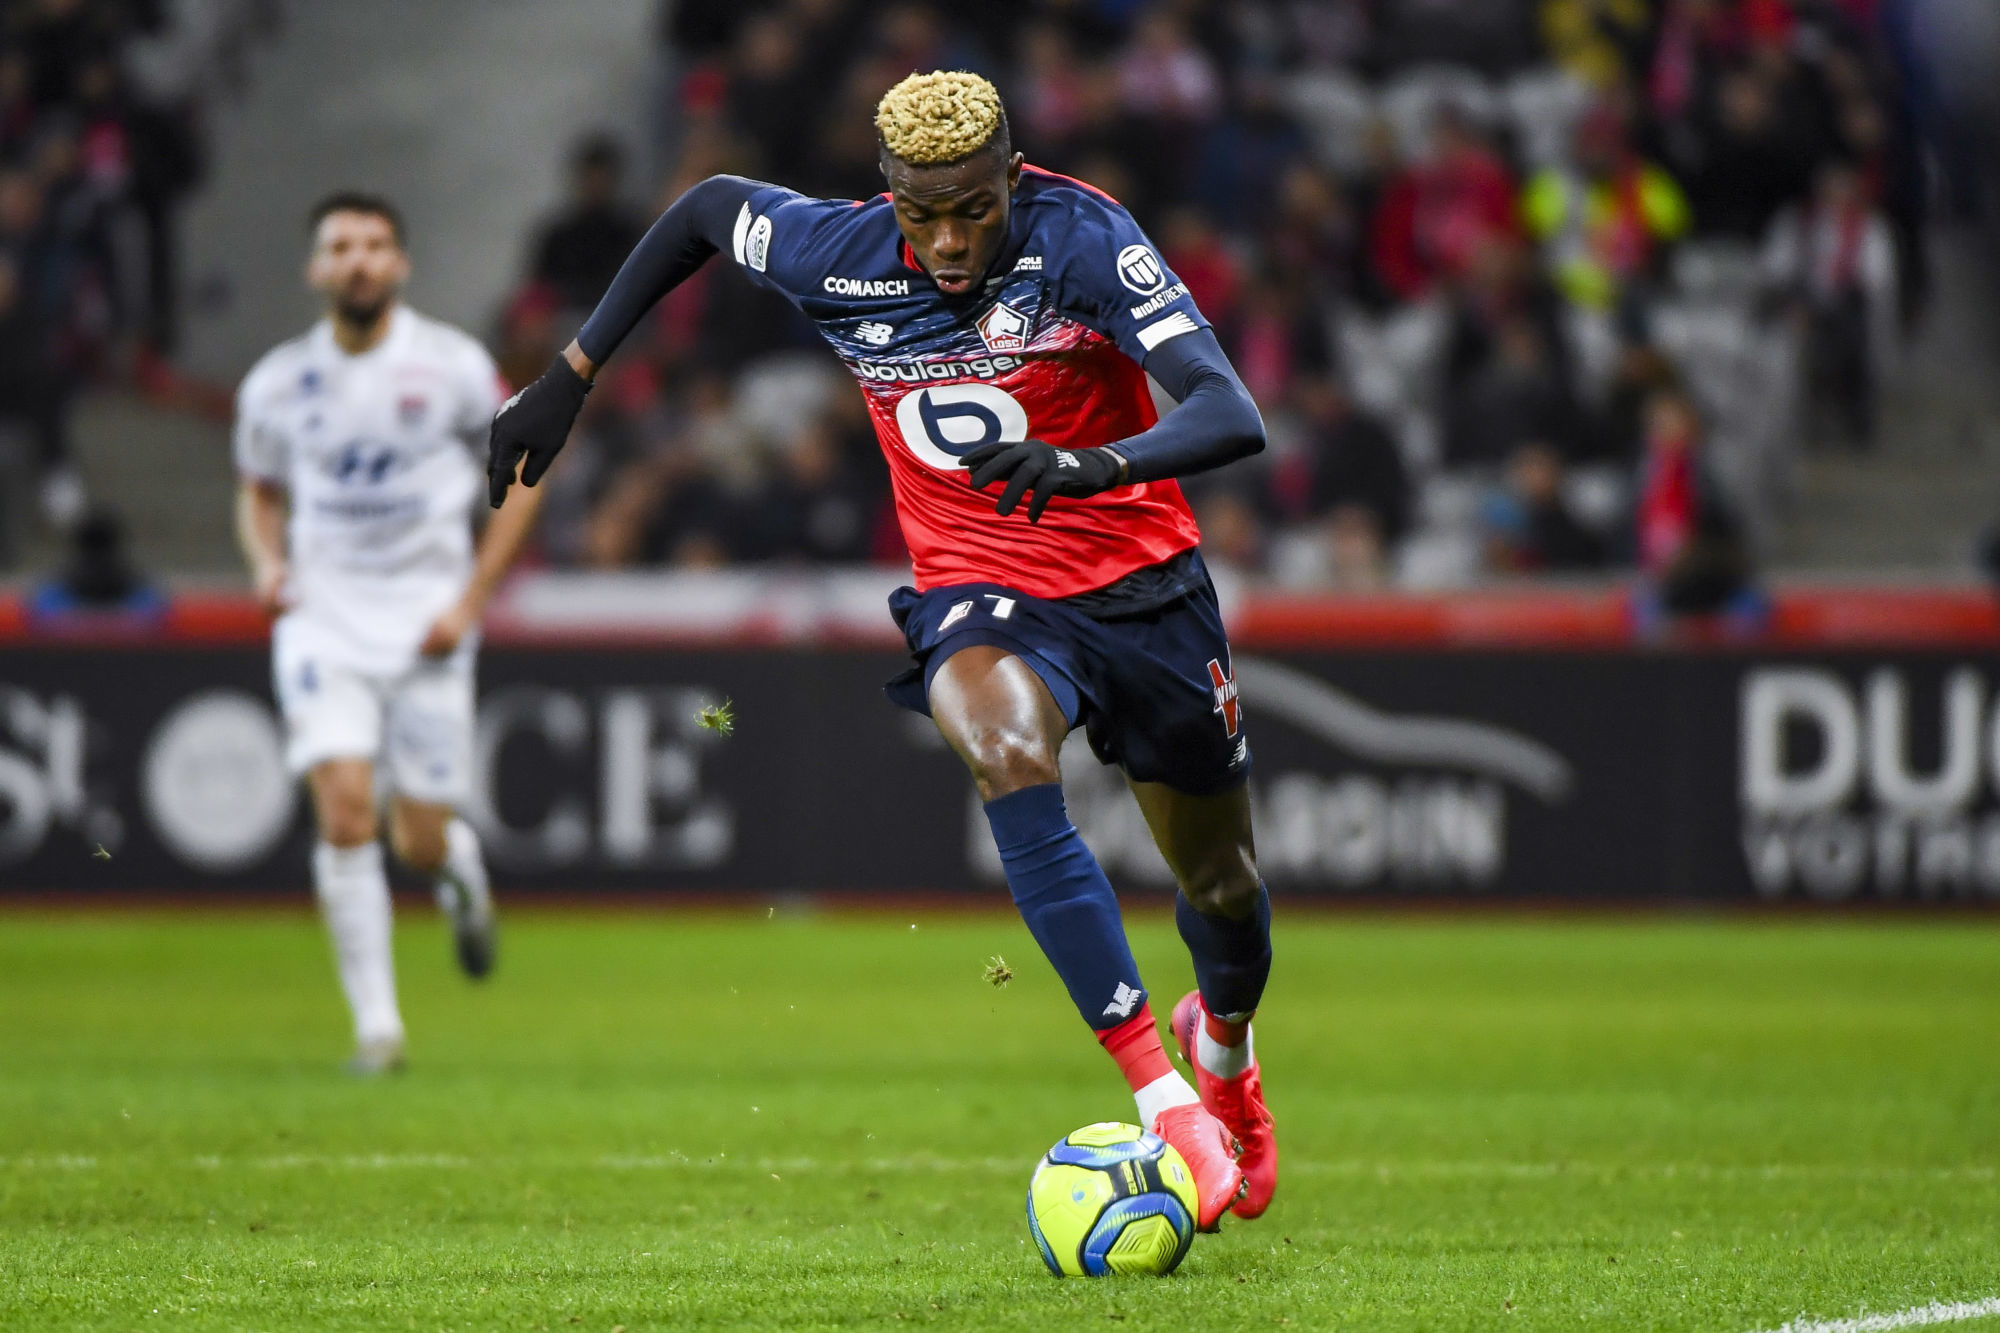 Victor OSIMHEN of Lille during the Ligue 1 match between Lille and Lyon at Stade Pierre-Mauroy on March 8, 2020 in Lille, France. (Photo by Aude Alcover/Icon Sport) - Victor OSIMHEN - Stade Pierre Mauroy - Lille (France)